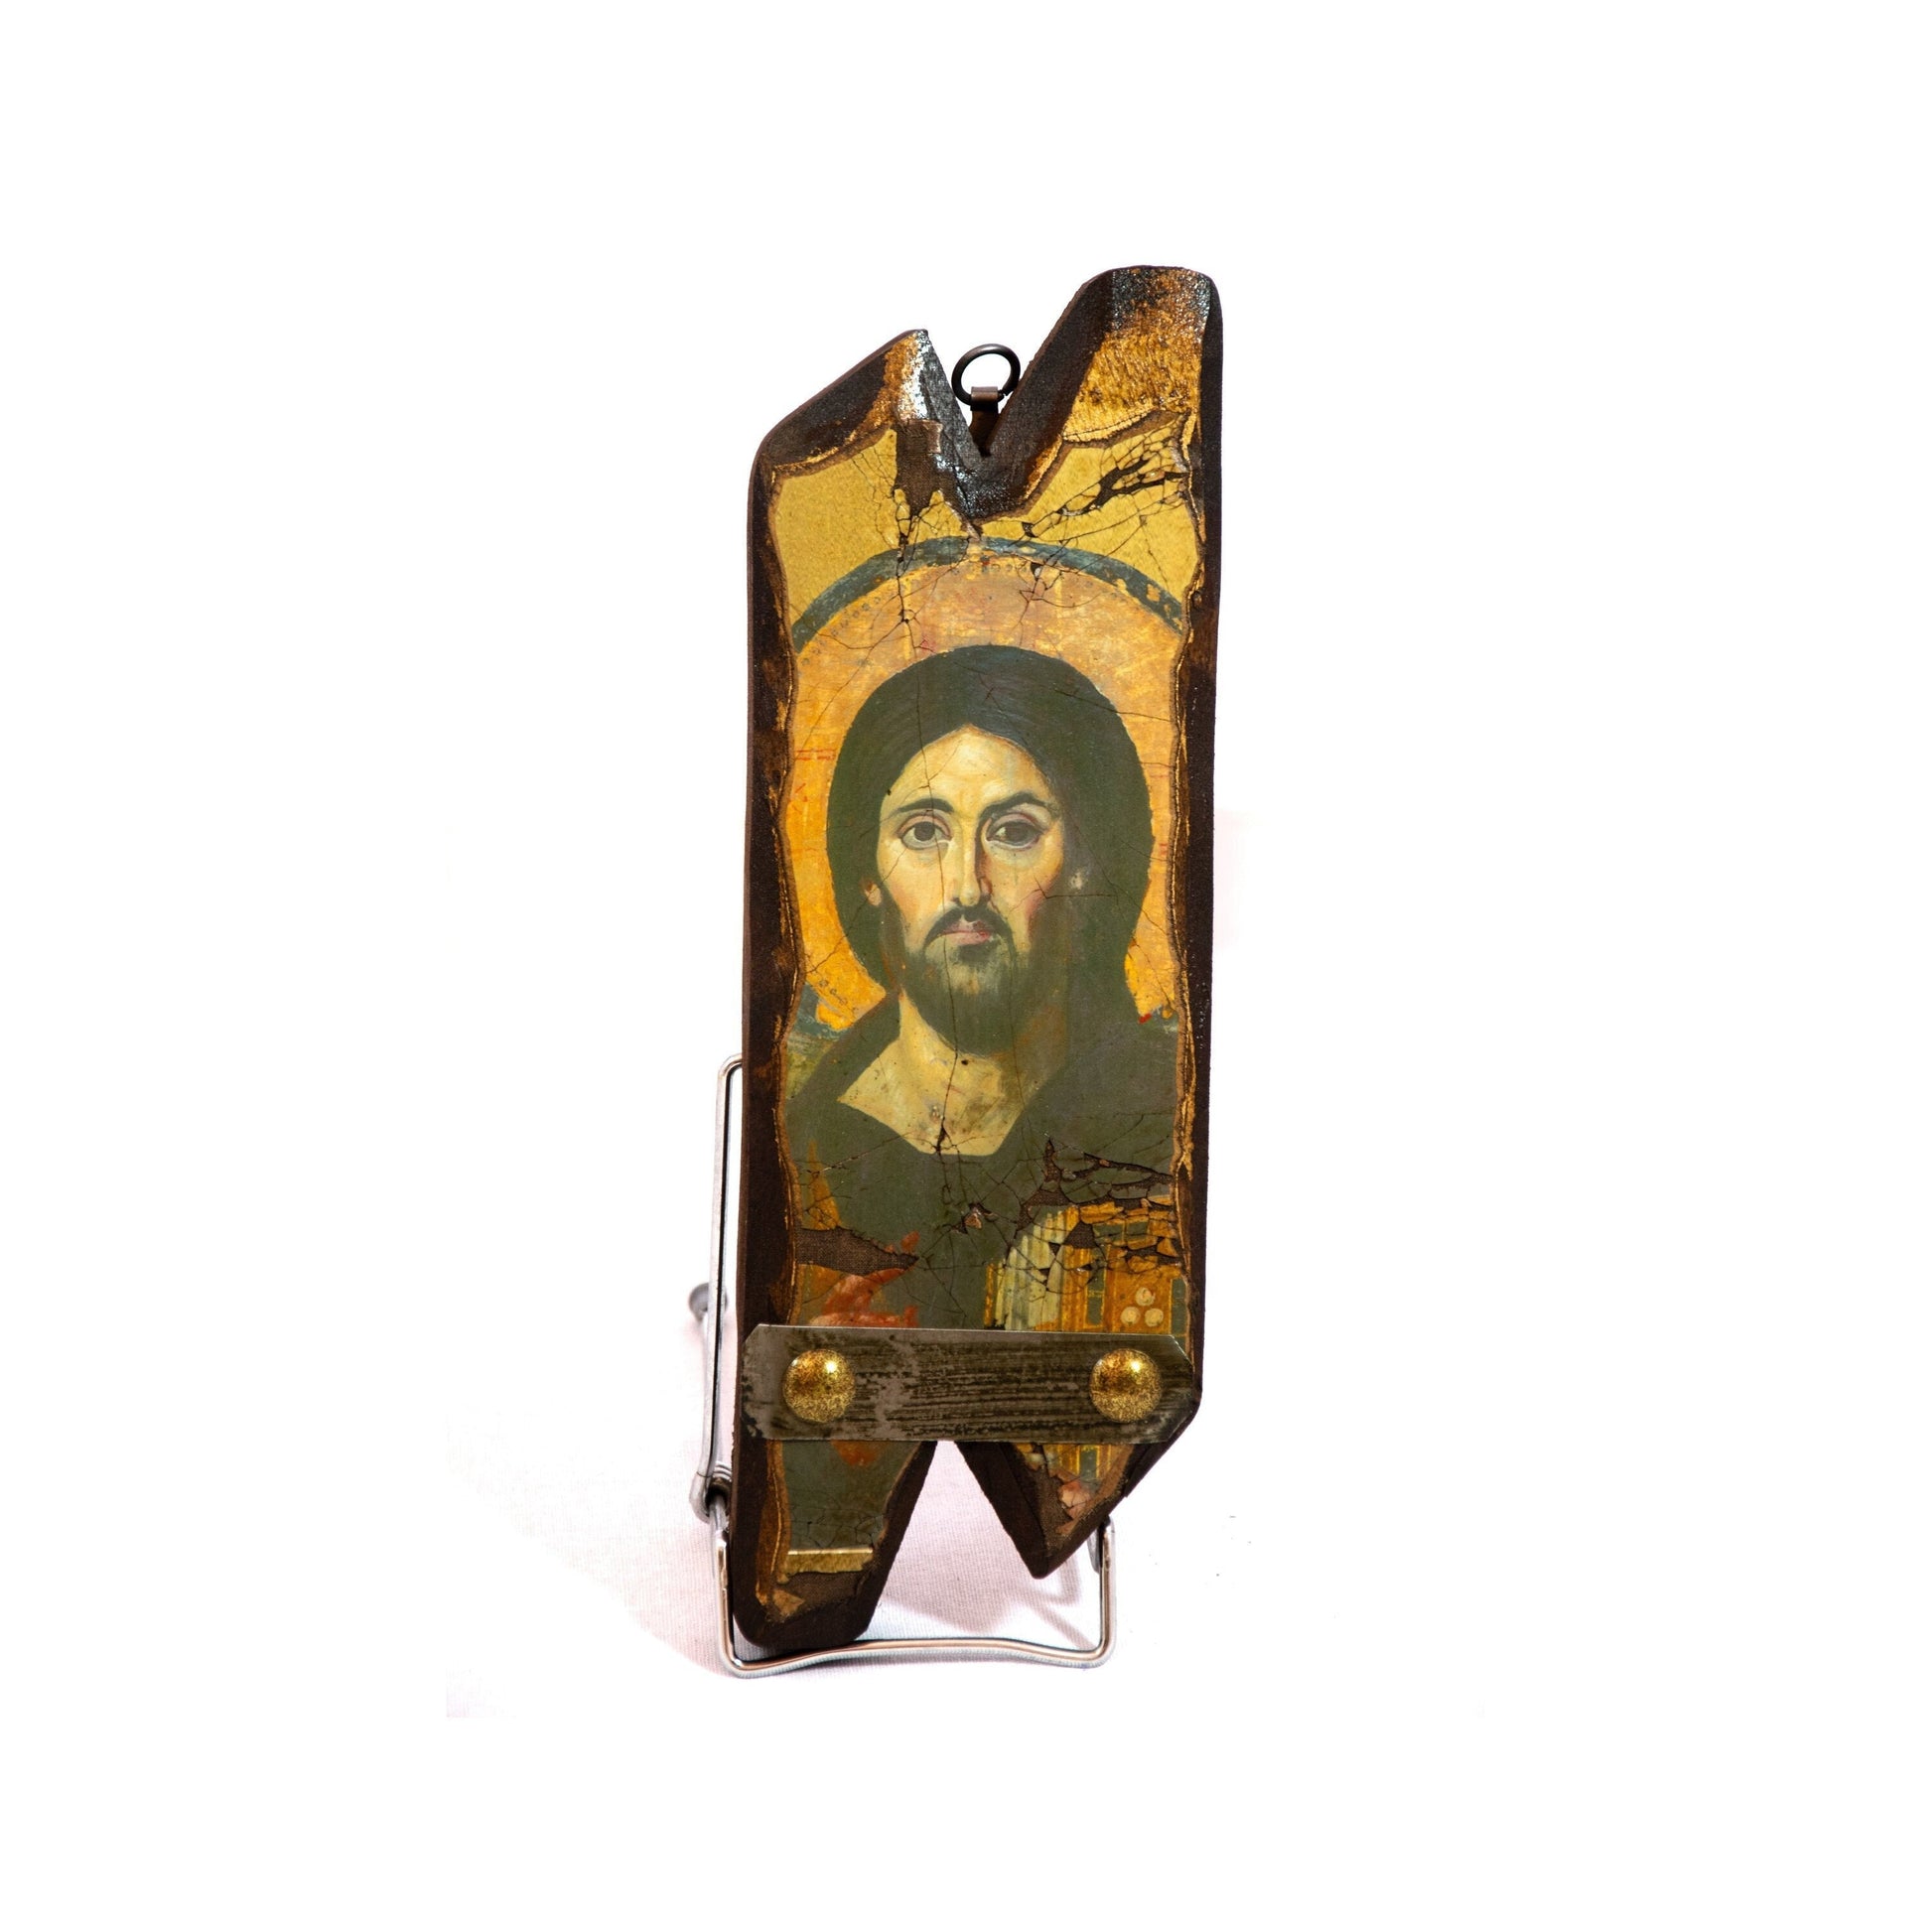 Jesus Christ icon, Handmade Greek Orthodox icon, Byzantine art wall hanging canvas icon of our Lord on wood plaque, religious decor TheHolyArt